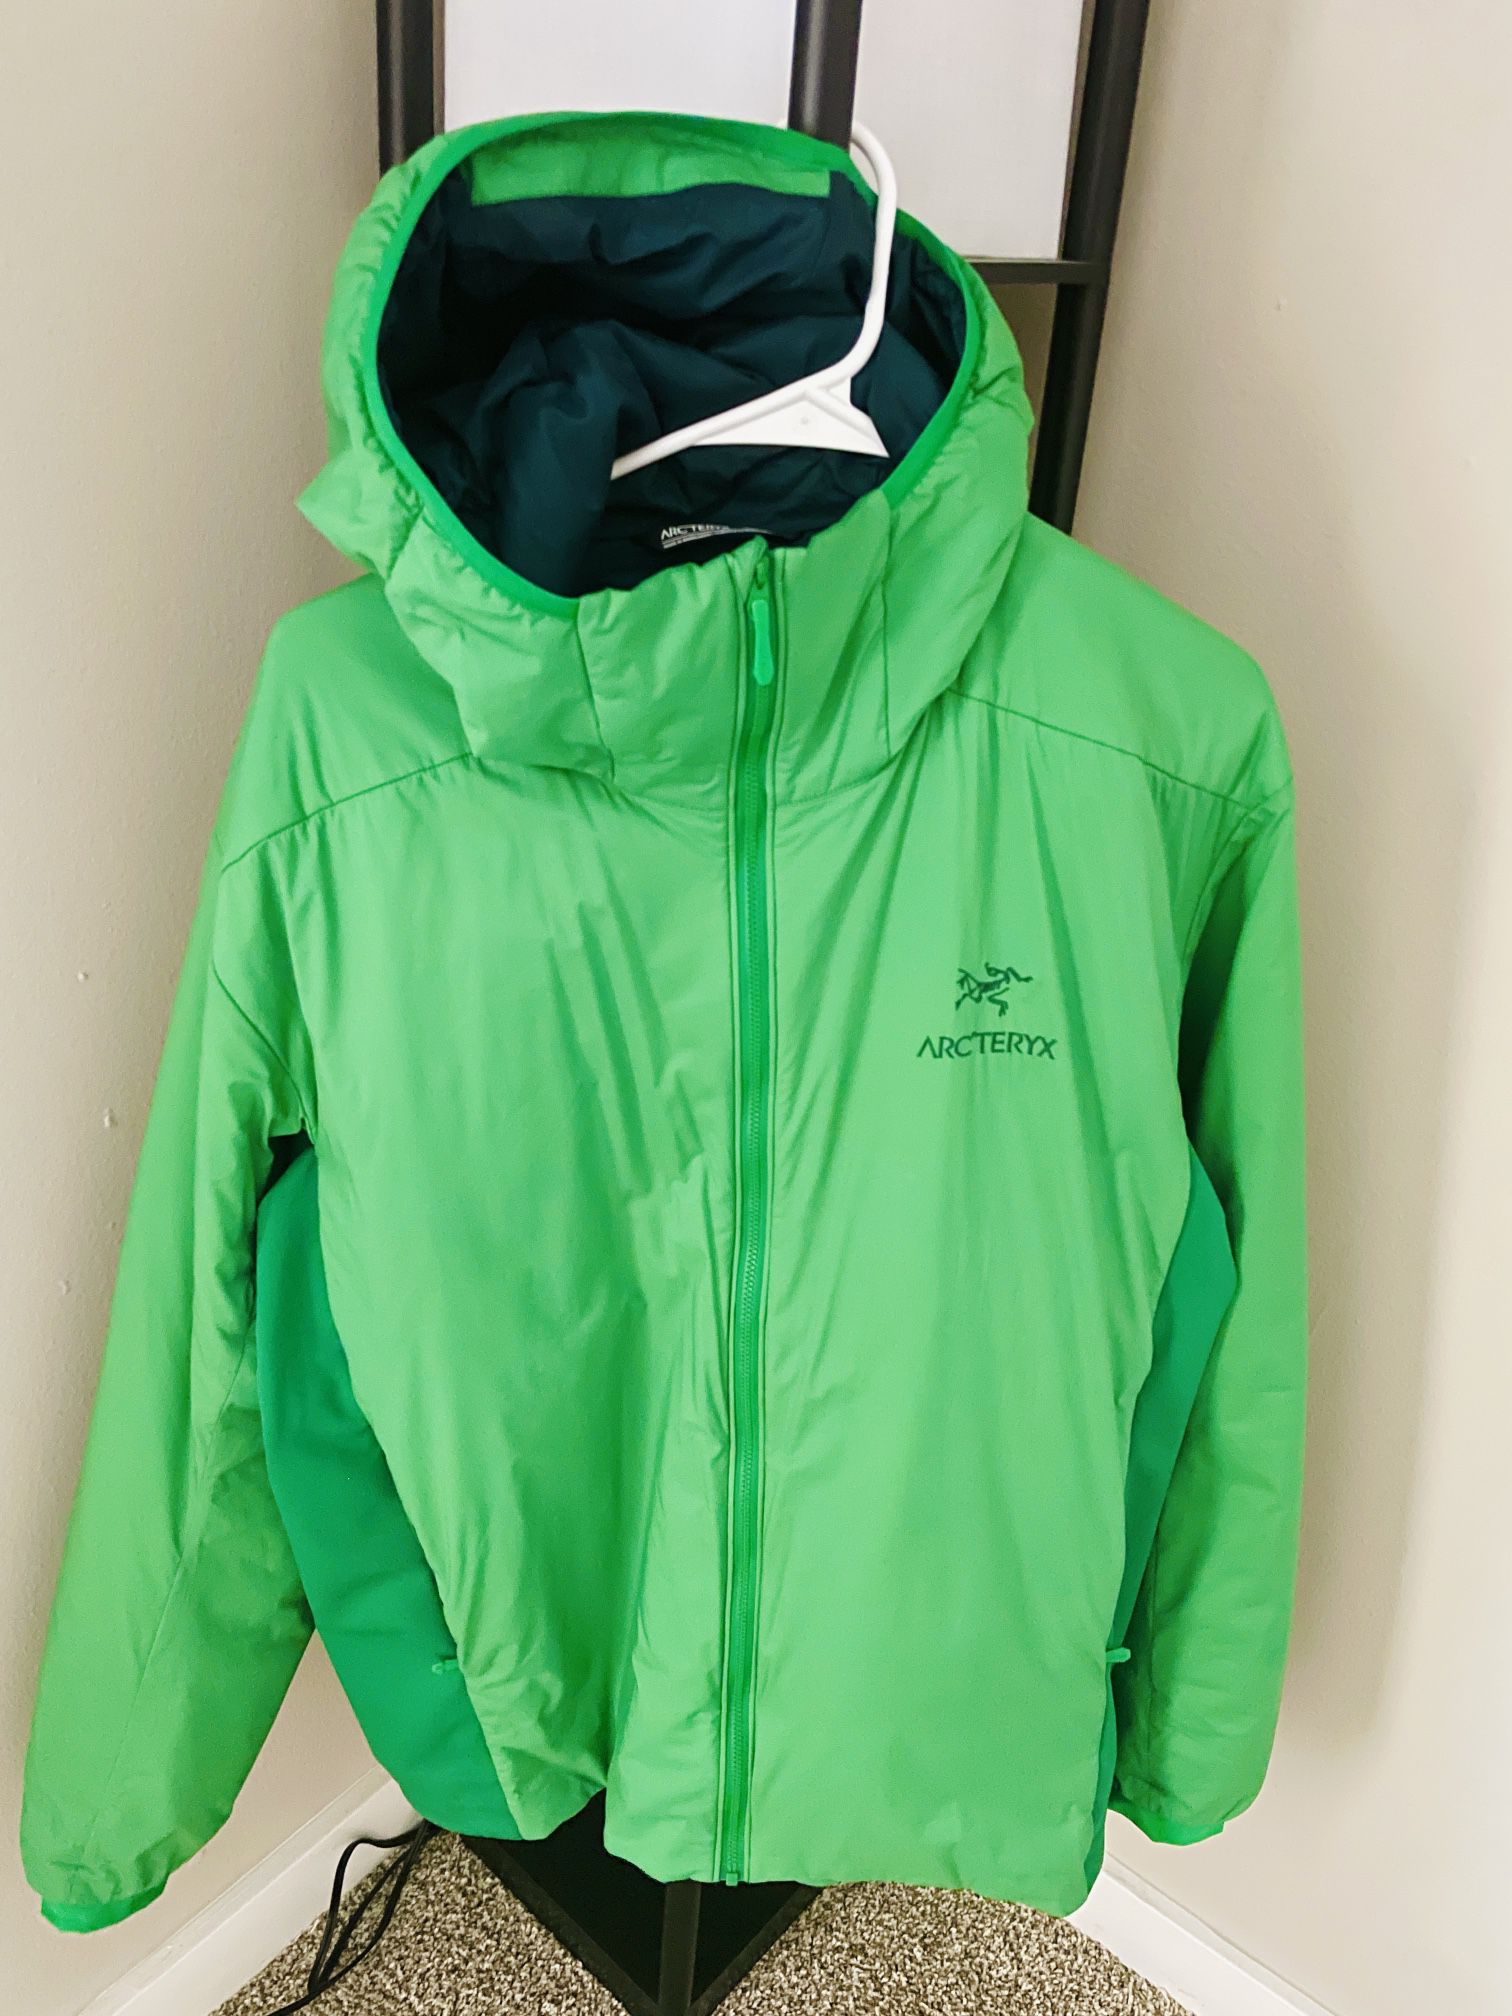 ALMOST HALF PRICE / Arc’teryx Atom LT Hoody Jacket / LIKE NEW / Retails for $300 plus tax, asking $180! Selling fast!!!!